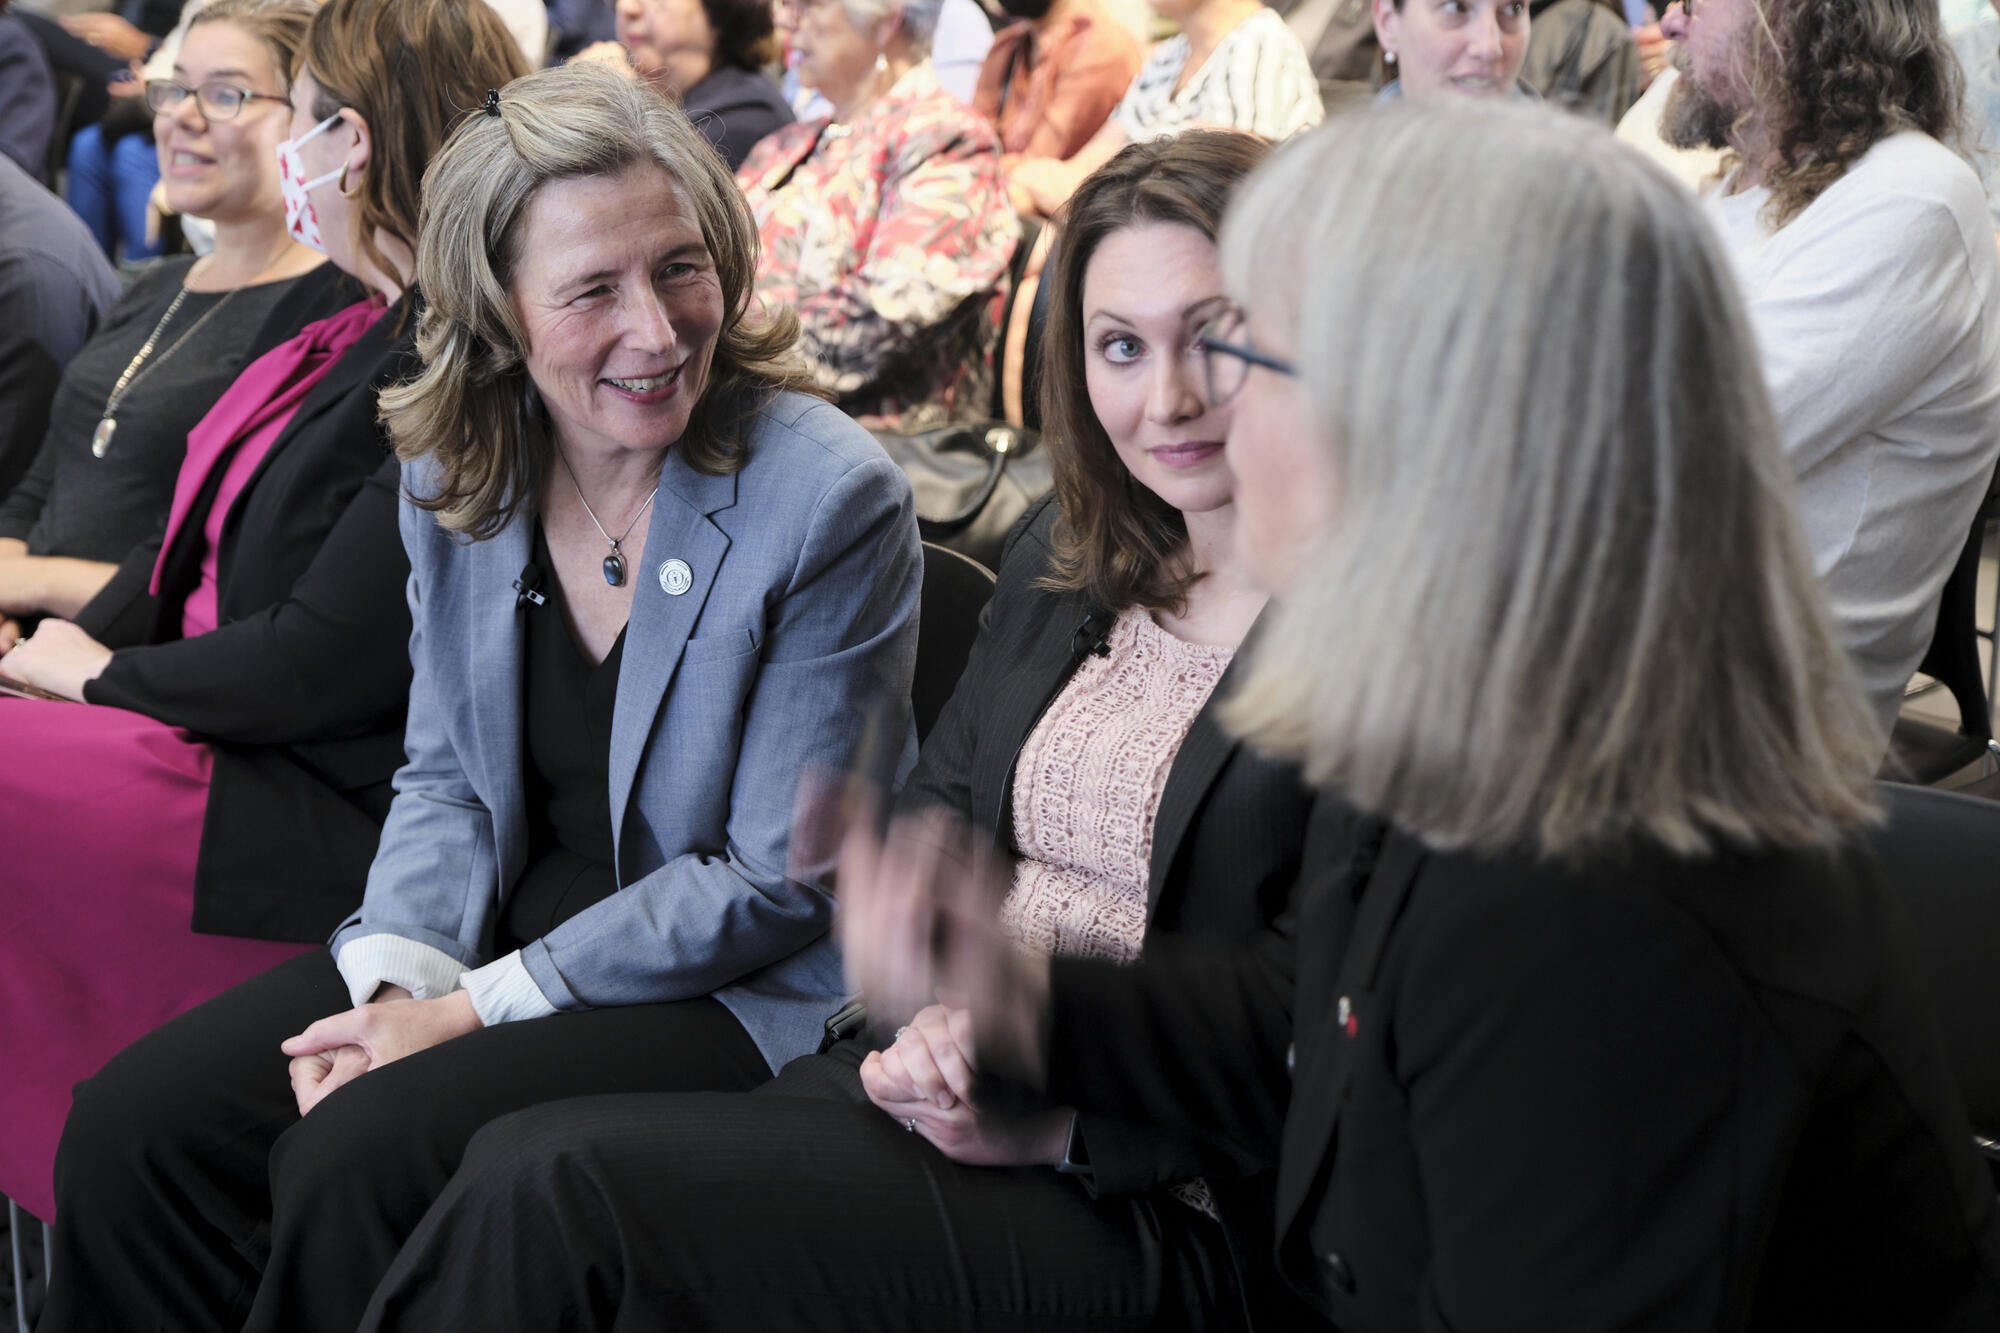 Dean Mary Wells, CRC Ashley Rose Mehlenbacher, and Nobel Laureate Donna Strickland in conversation in the audience of TRuST's inaugural event.